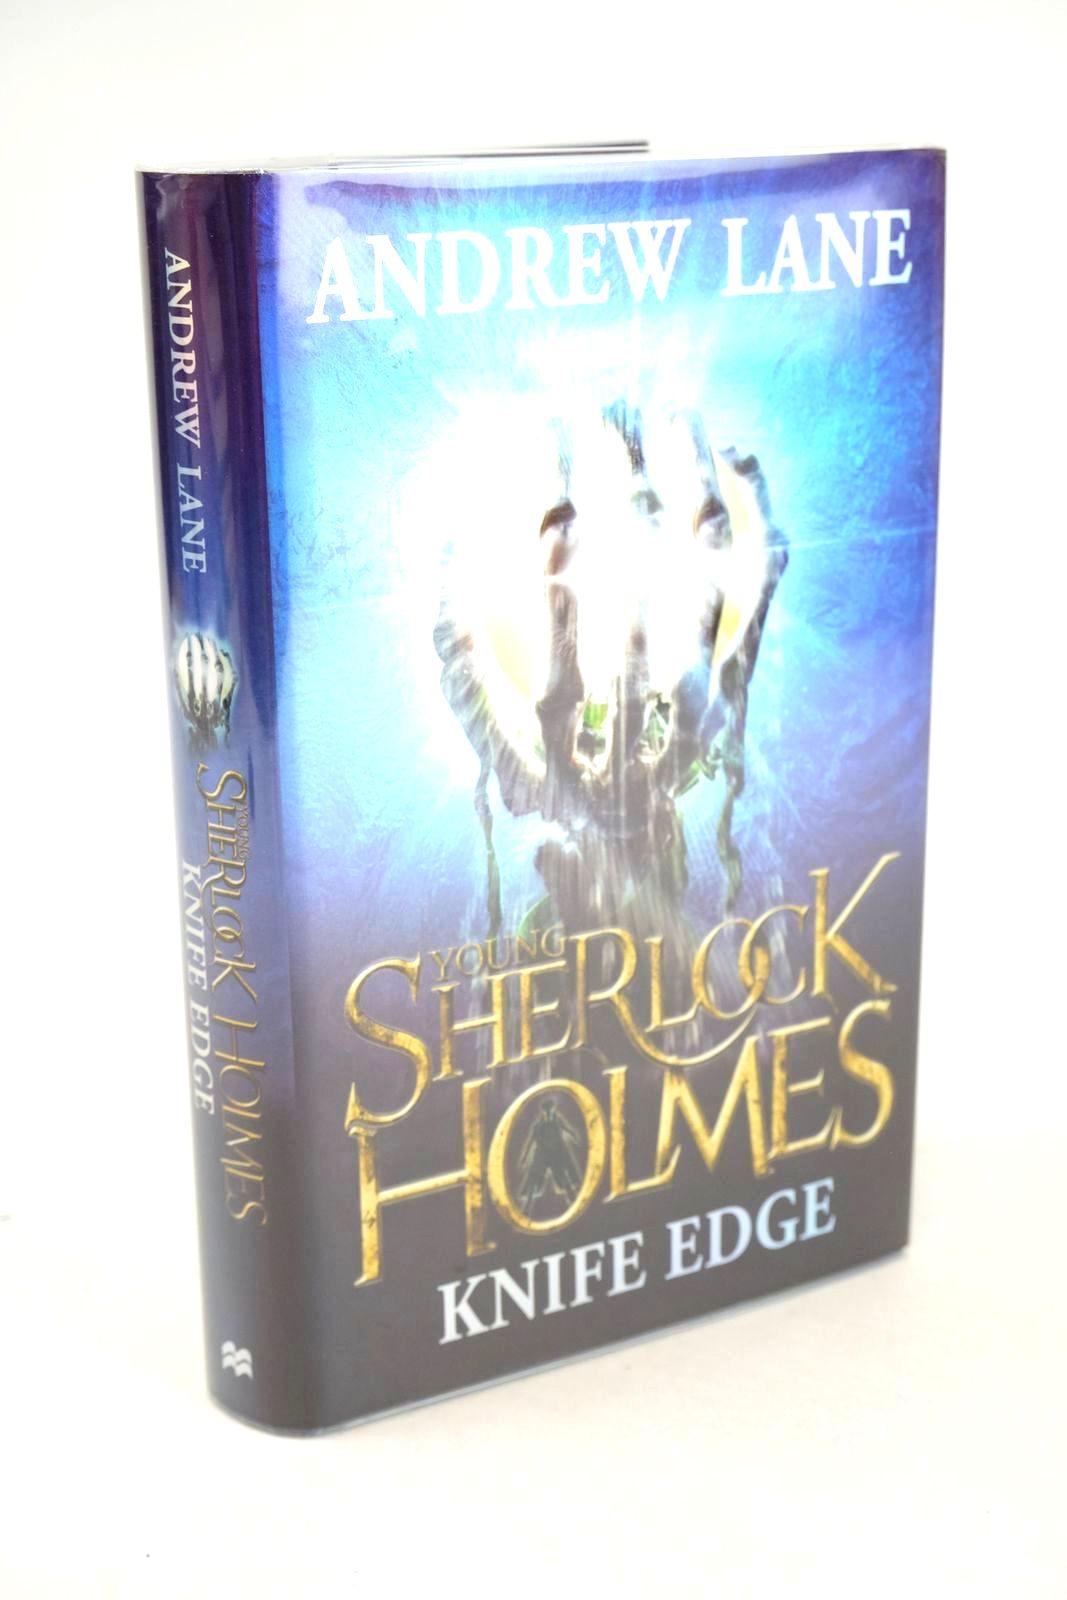 Photo of YOUNG SHERLOCK HOLMES - KNIFE EDGE written by Lane, Andrew illustrated by Walker, Kev Hadley, Sam published by Macmillan Children's Books (STOCK CODE: 1325751)  for sale by Stella & Rose's Books